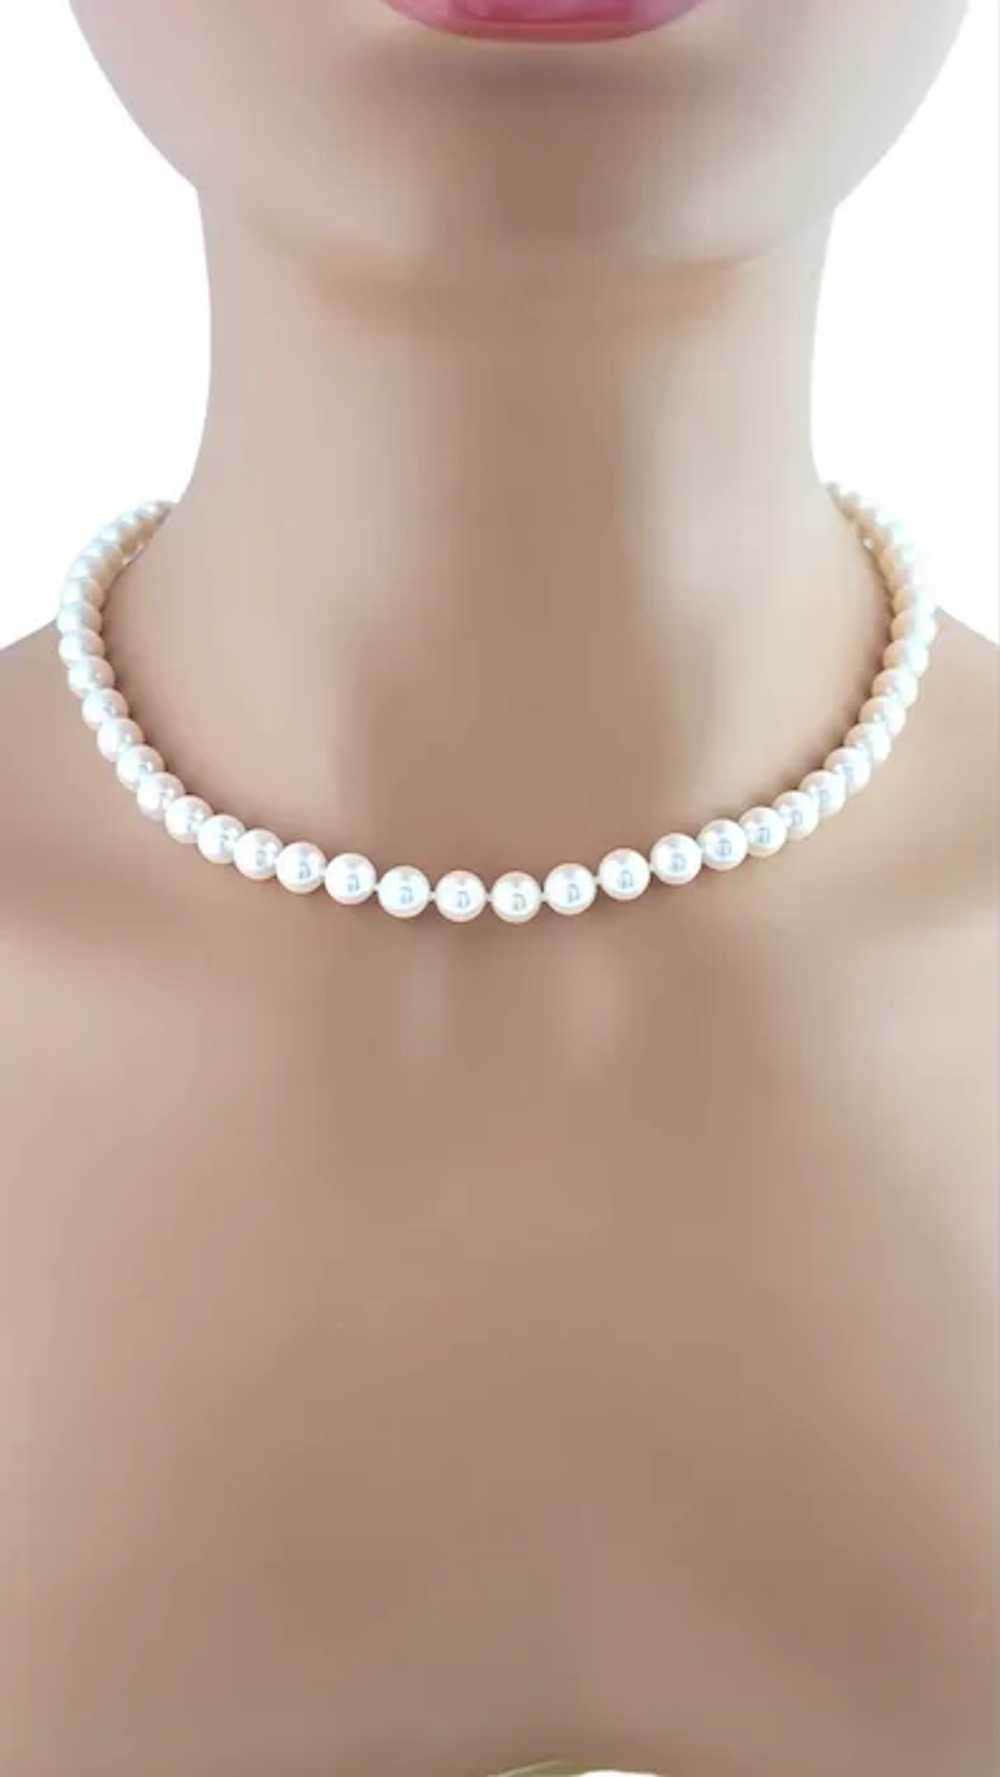 Tiffany & Co. 18K White Gold Pearl Necklace 18.5" - image 6